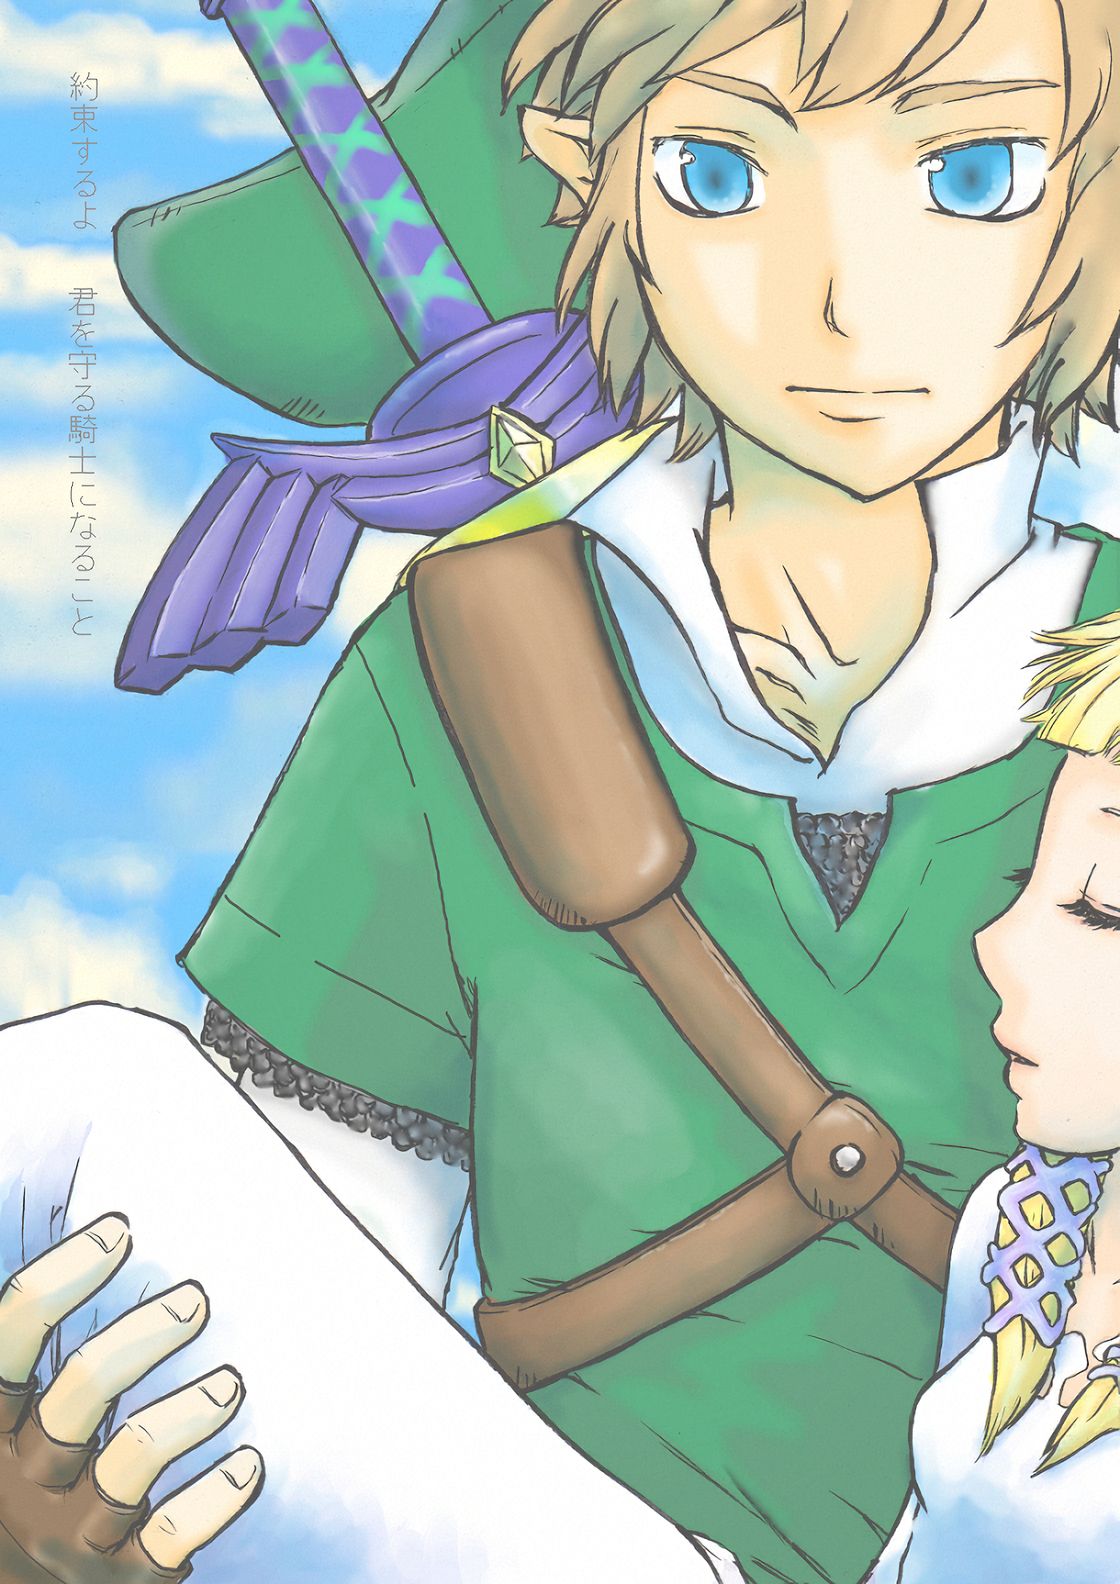 [Buthi] Link to Zelda no... | I promise, I will become a knight to protect you (The Legend of Zelda: Skyward Sword) [English] [Marie] [ぶっちぃ] リンクとゼルダの… (ゼルダの伝説 スカイウォードソード) [英訳]